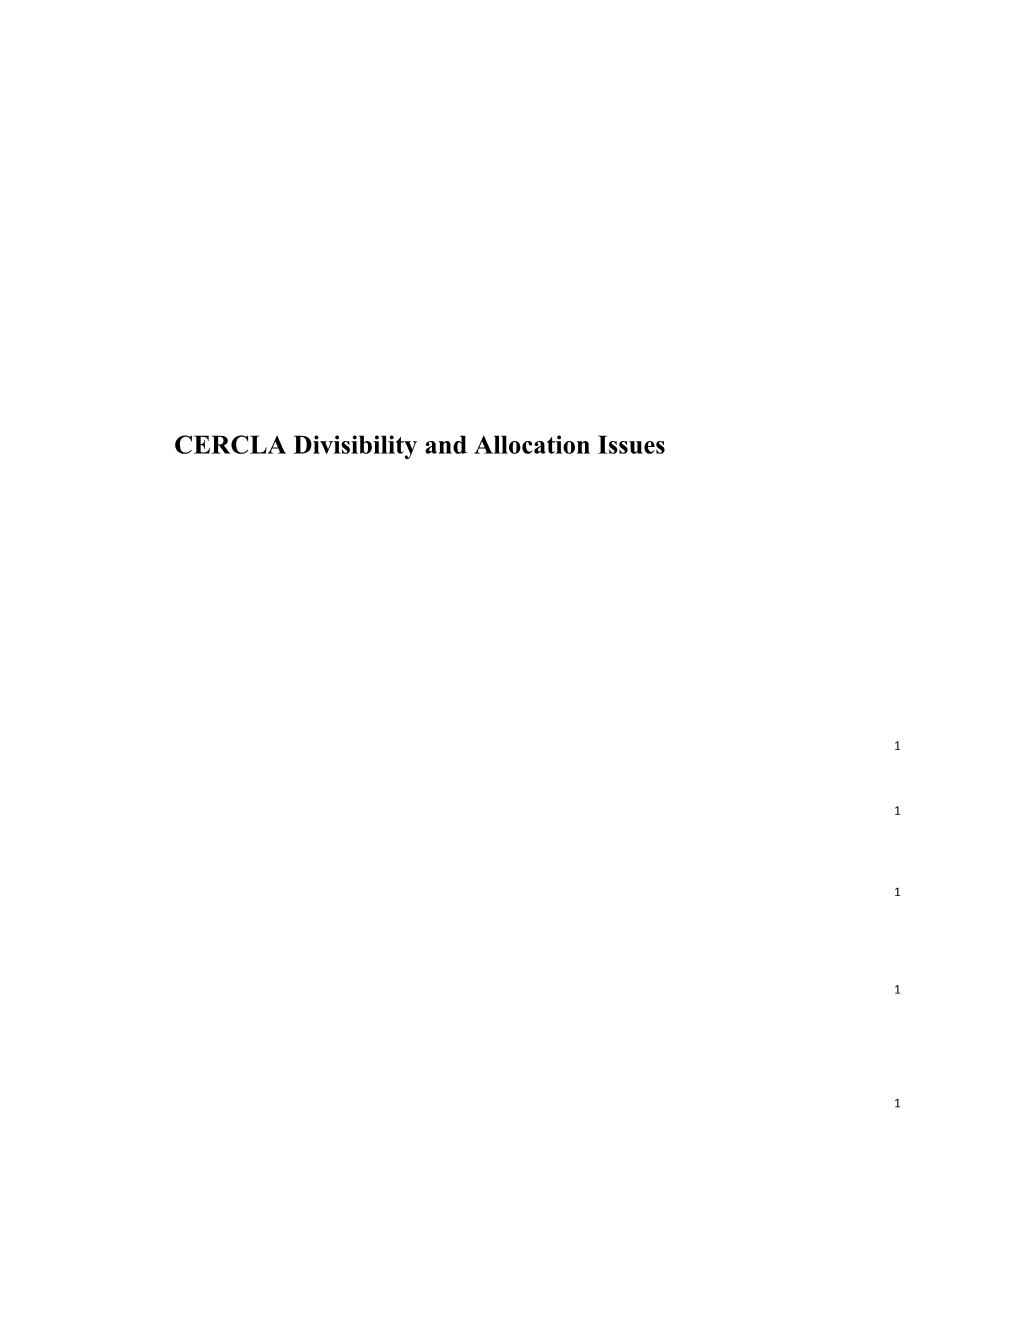 CERCLA Divisibility and Allocation Issues